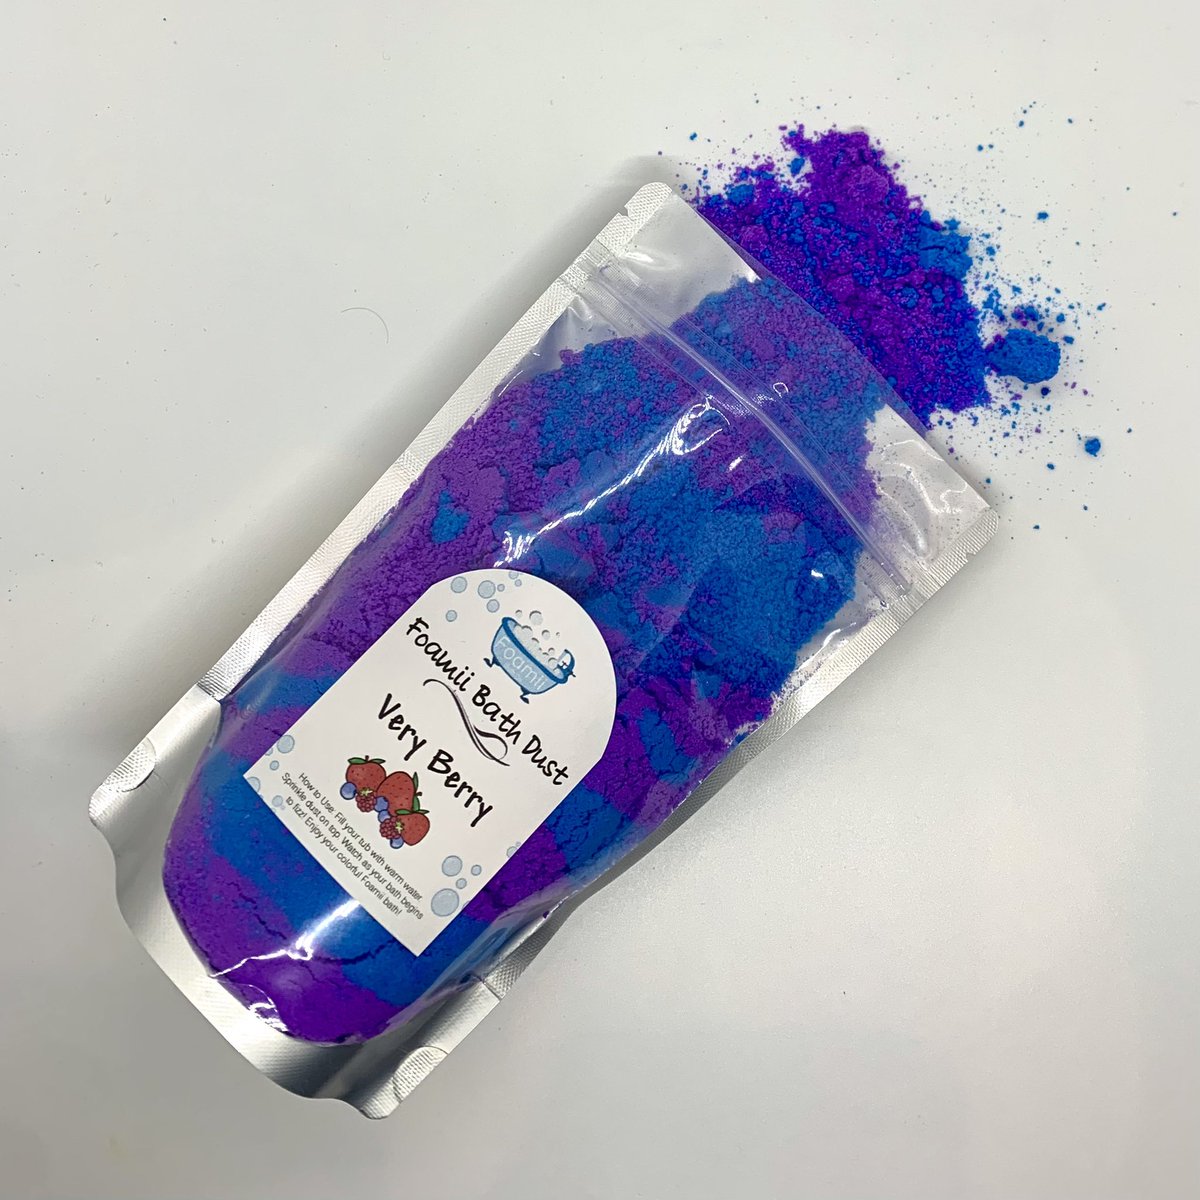 More bath dust? Yep!🥰
Now available in Very Berry with a colorful purple and blue mix! 🍓🍒

Only $4 a bag for multiple uses!😱

What do you think? - LINK IN BIO

 #bathdust #bathpowder #berry #veryberry #affordableselfcare #foamii #handmadewithlove #selfcareproducts